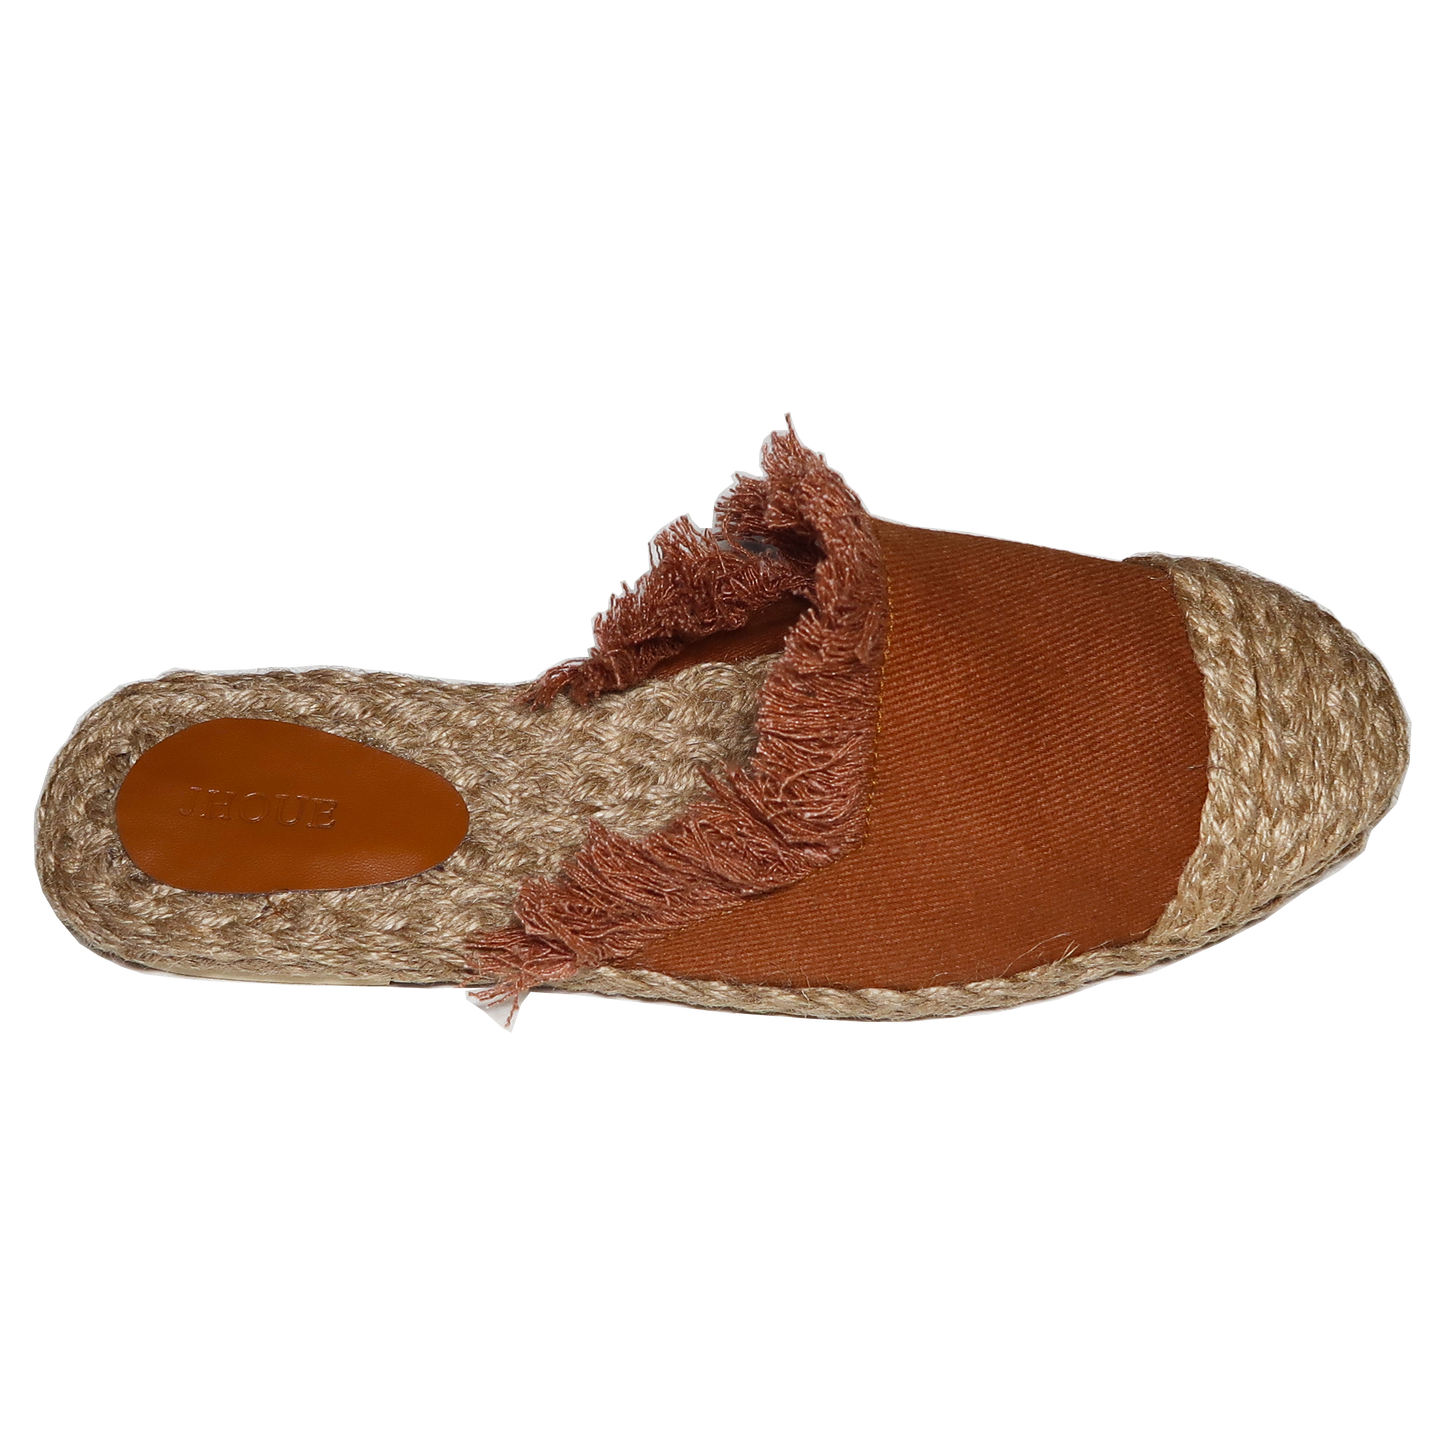 Handmade Abaca Insole Tan Ripped Canvas Sandals Slippers Flat Semi Pointed Toe Half Shoes